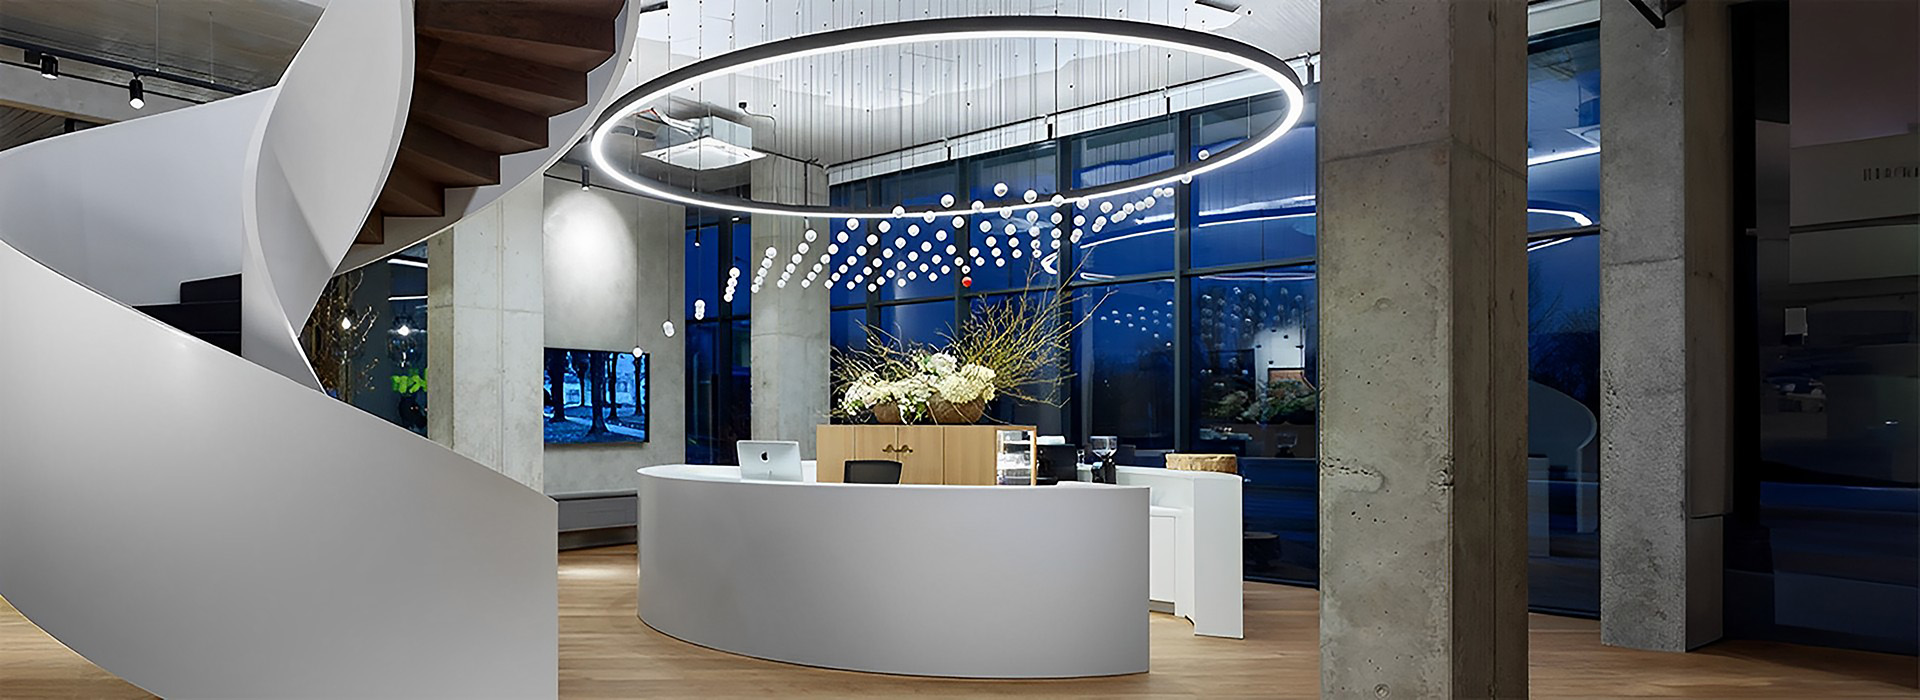 Prolicht - Zaneen: lighting distributor for architectural and technical lighting in North America